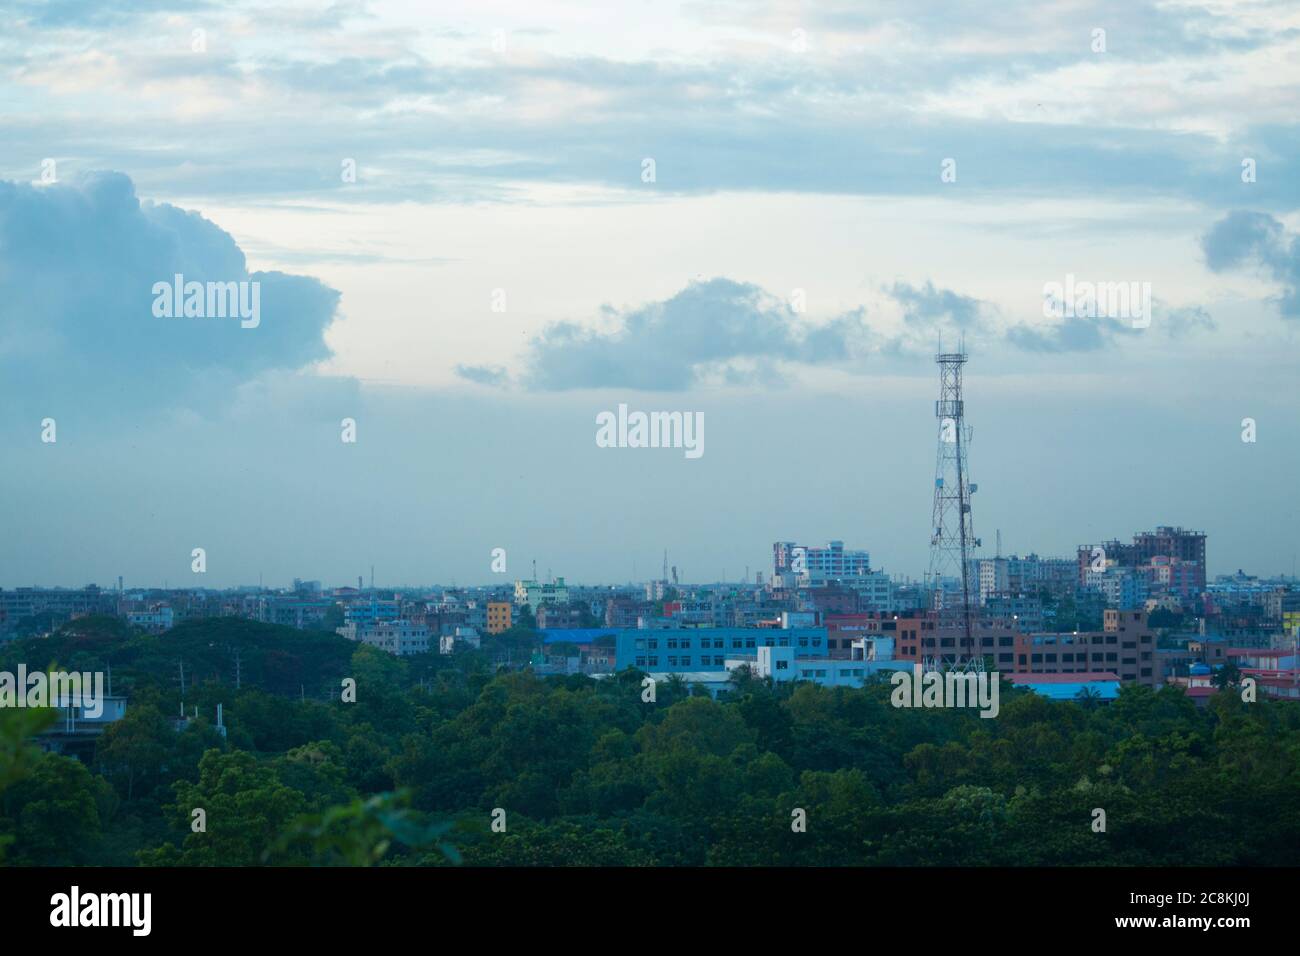 Building of dhaka city with city scraper in Bangladesh Stock Photo